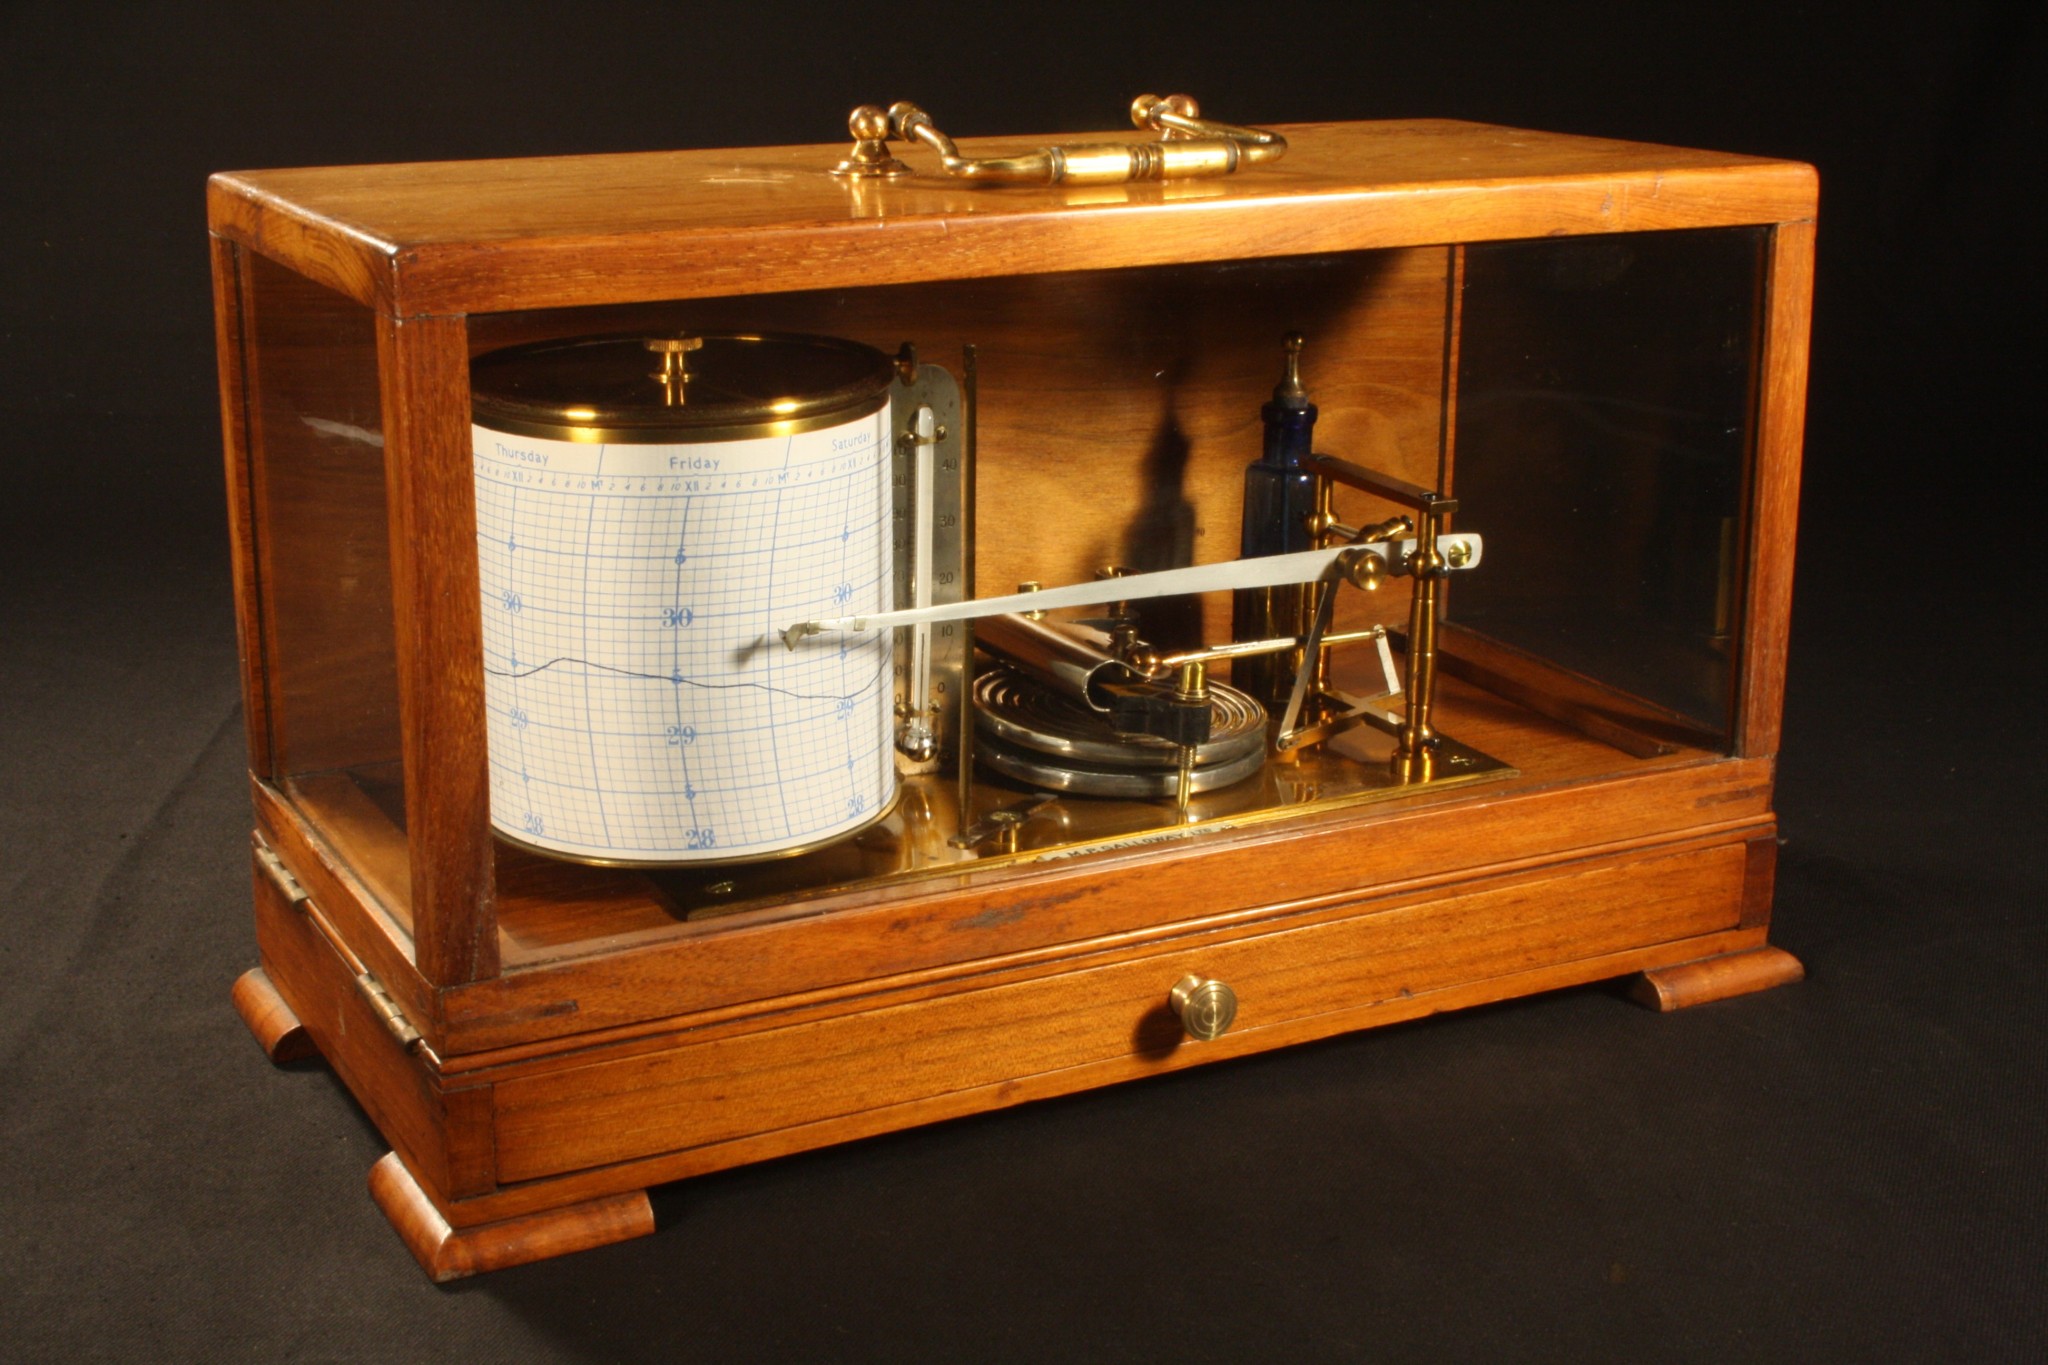 Image of Drum Barograph by Galloway